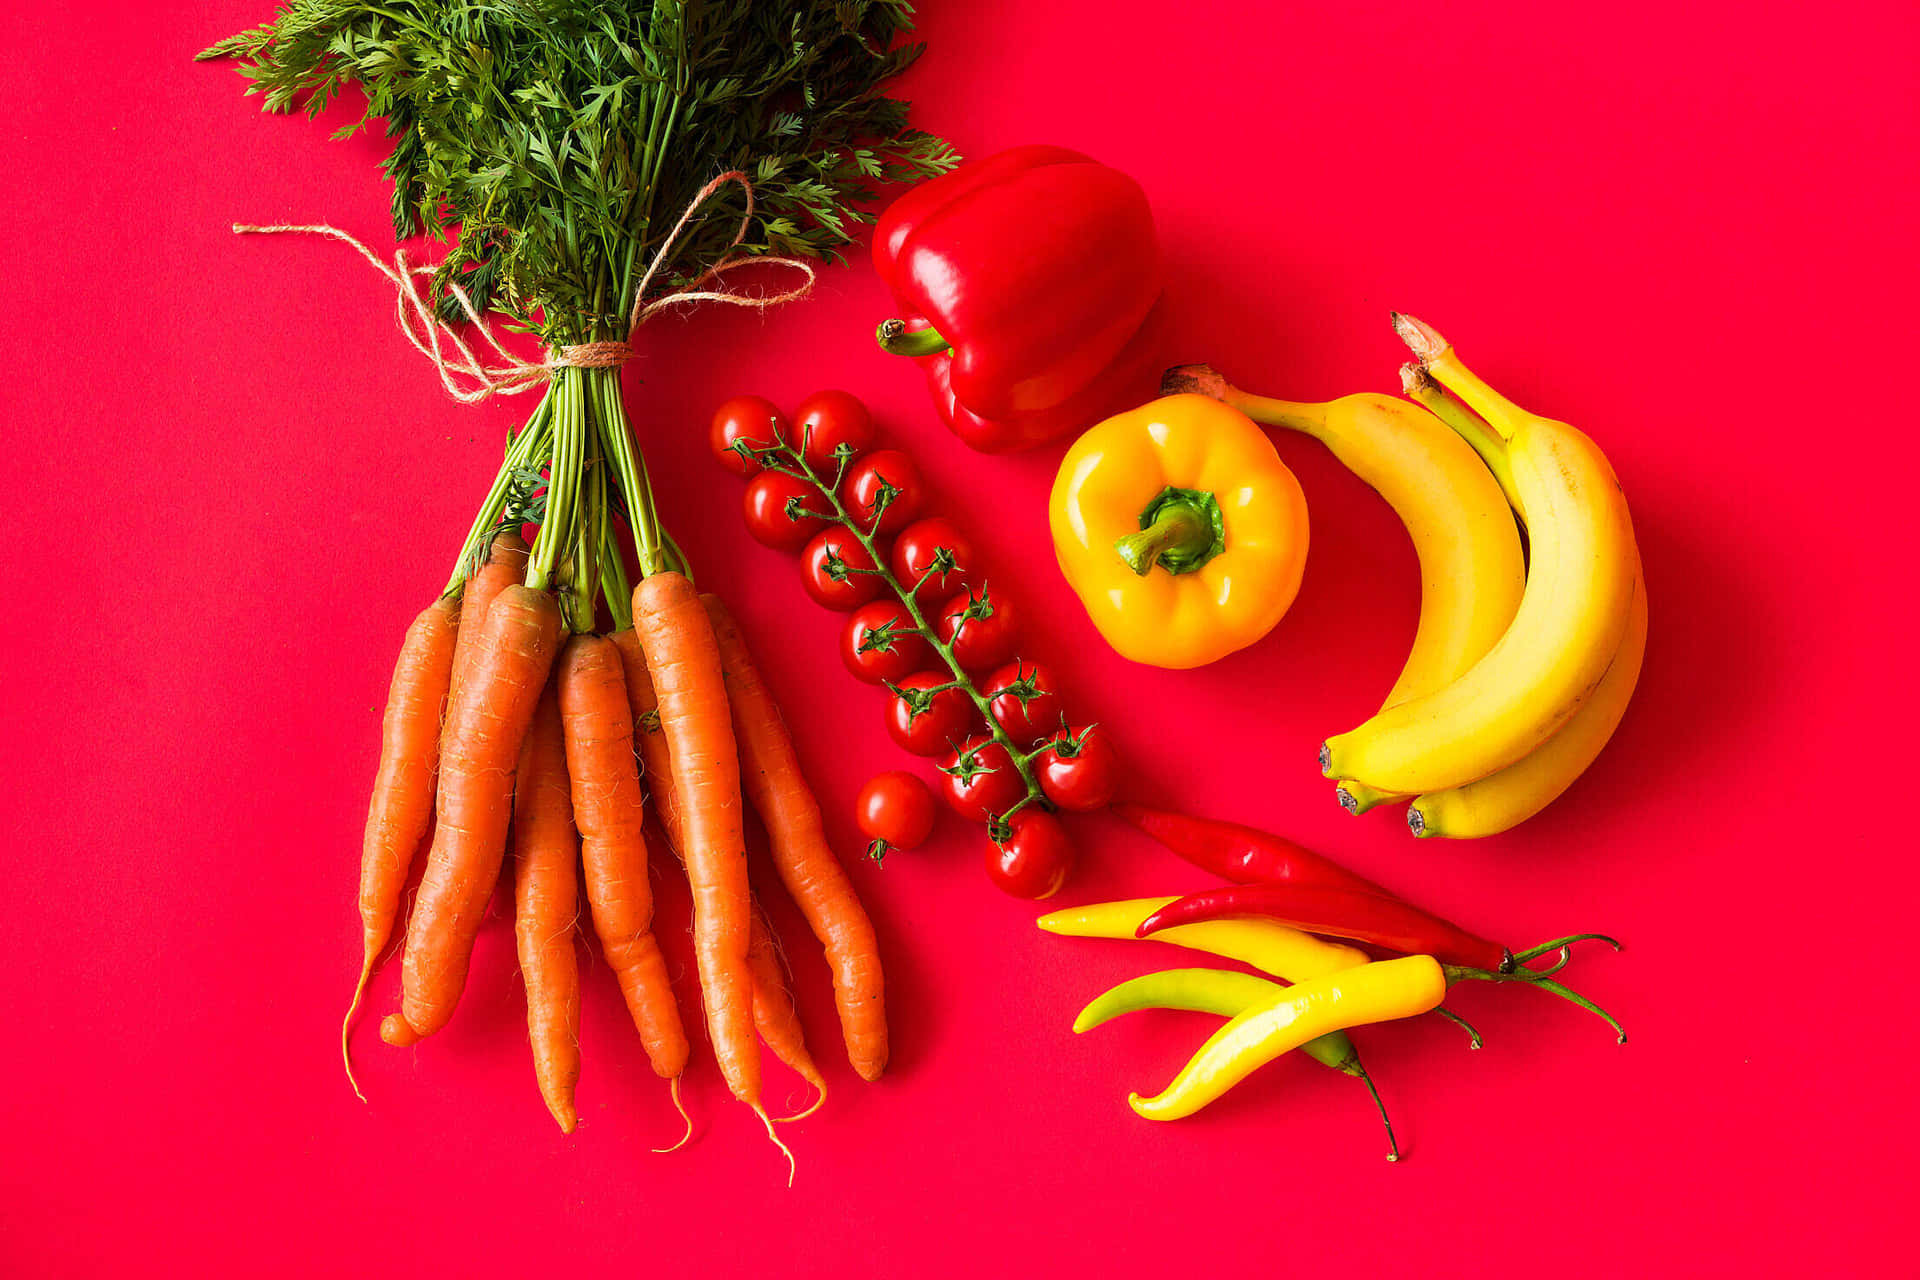 A Bunch Of Carrots, Bananas, And Other Vegetables On A Red Background